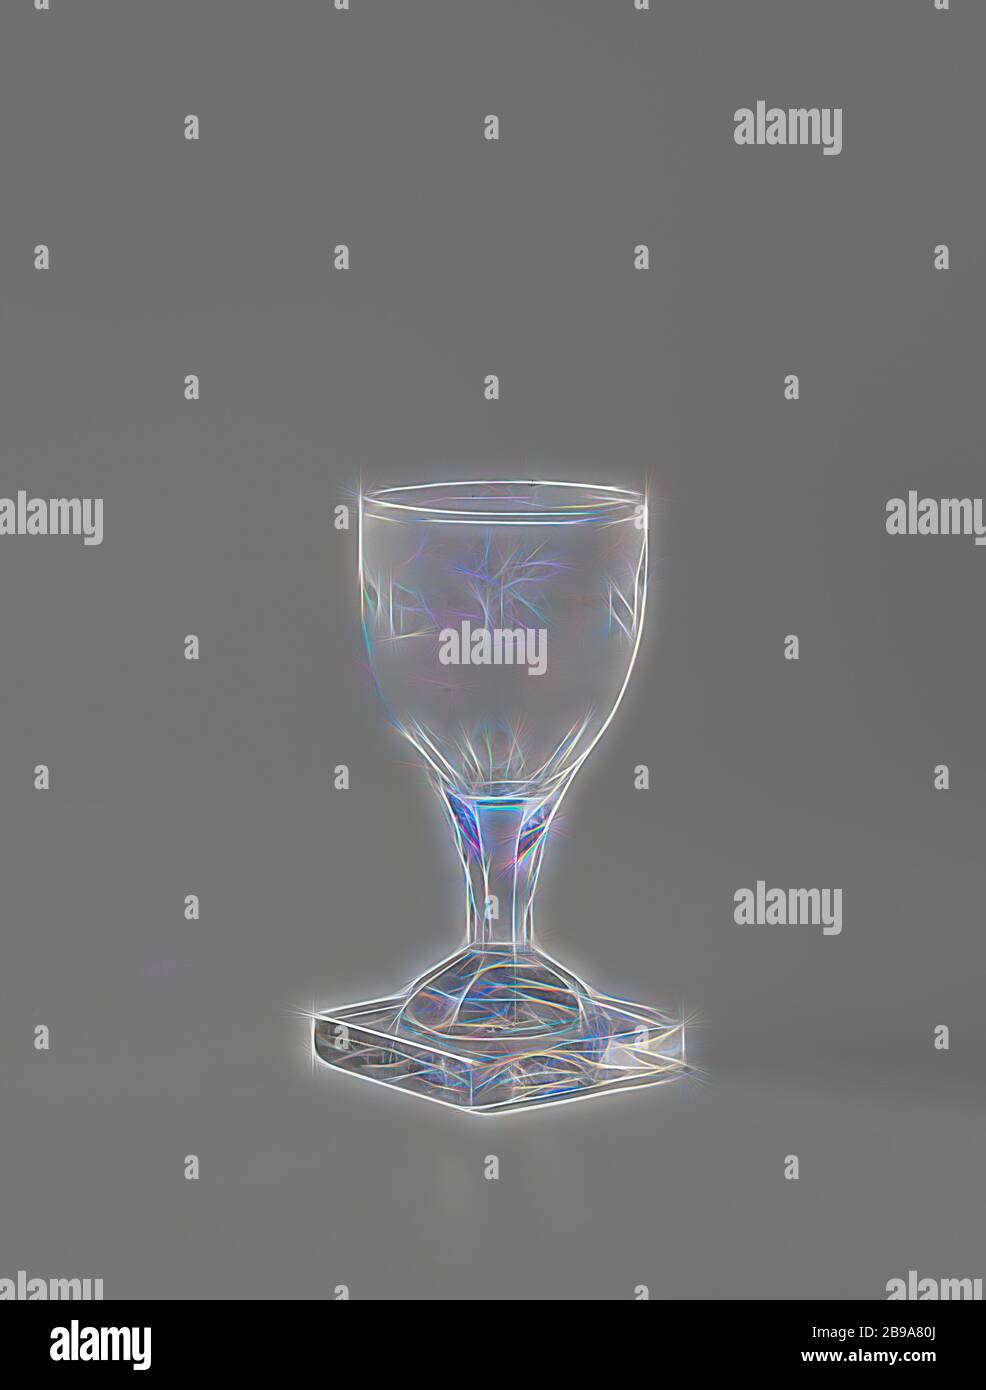 https://c8.alamy.com/comp/2B9A80J/chalice-on-a-square-plinth-with-hebrew-inscription-circular-convex-carved-base-on-a-square-plinth-flared-facet-cut-trunk-which-merges-into-the-curved-cup-on-the-chalice-against-a-frosted-etched-ground-the-hebrew-text-i-will-receive-the-cup-of-deliverance-and-call-upon-the-name-of-the-lord-psalm-116-13-a-leafy-branch-between-the-first-and-the-last-hebrew-letter-on-the-plinth-in-hebrew-daniel-di-dh-de-castro-5-611-anonymous-c-1851-glass-glassblowing-h-123-cm-w-57-cm-d-55-cm-reimagined-by-gibon-design-of-warm-cheerful-glowing-of-brightness-and-light-rays-radi-2B9A80J.jpg